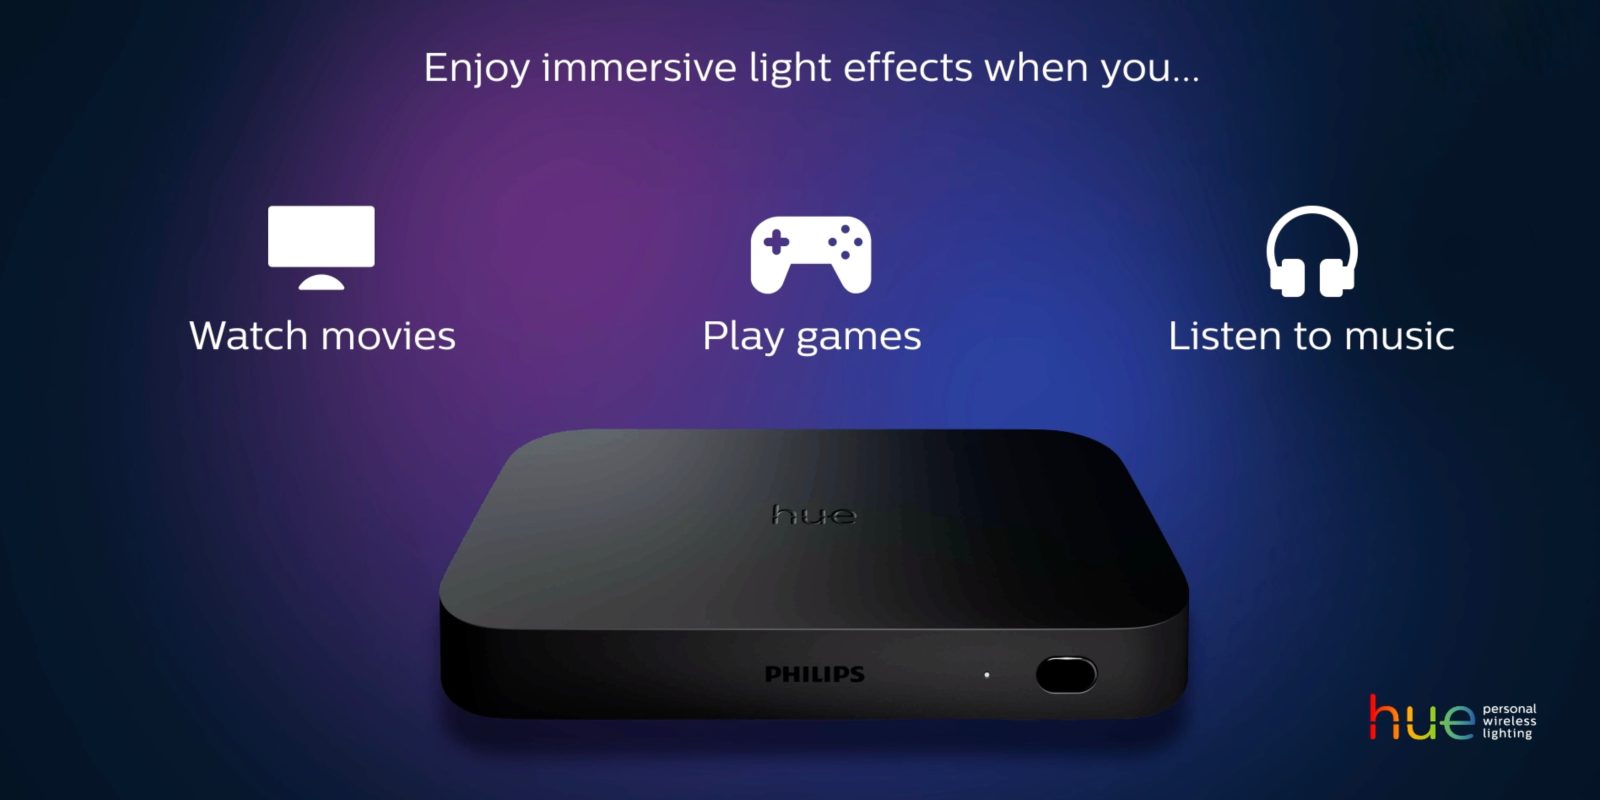 Philips Hue unveils new HDMI TV box that lets smart lights color match what  you watch - 9to5Mac